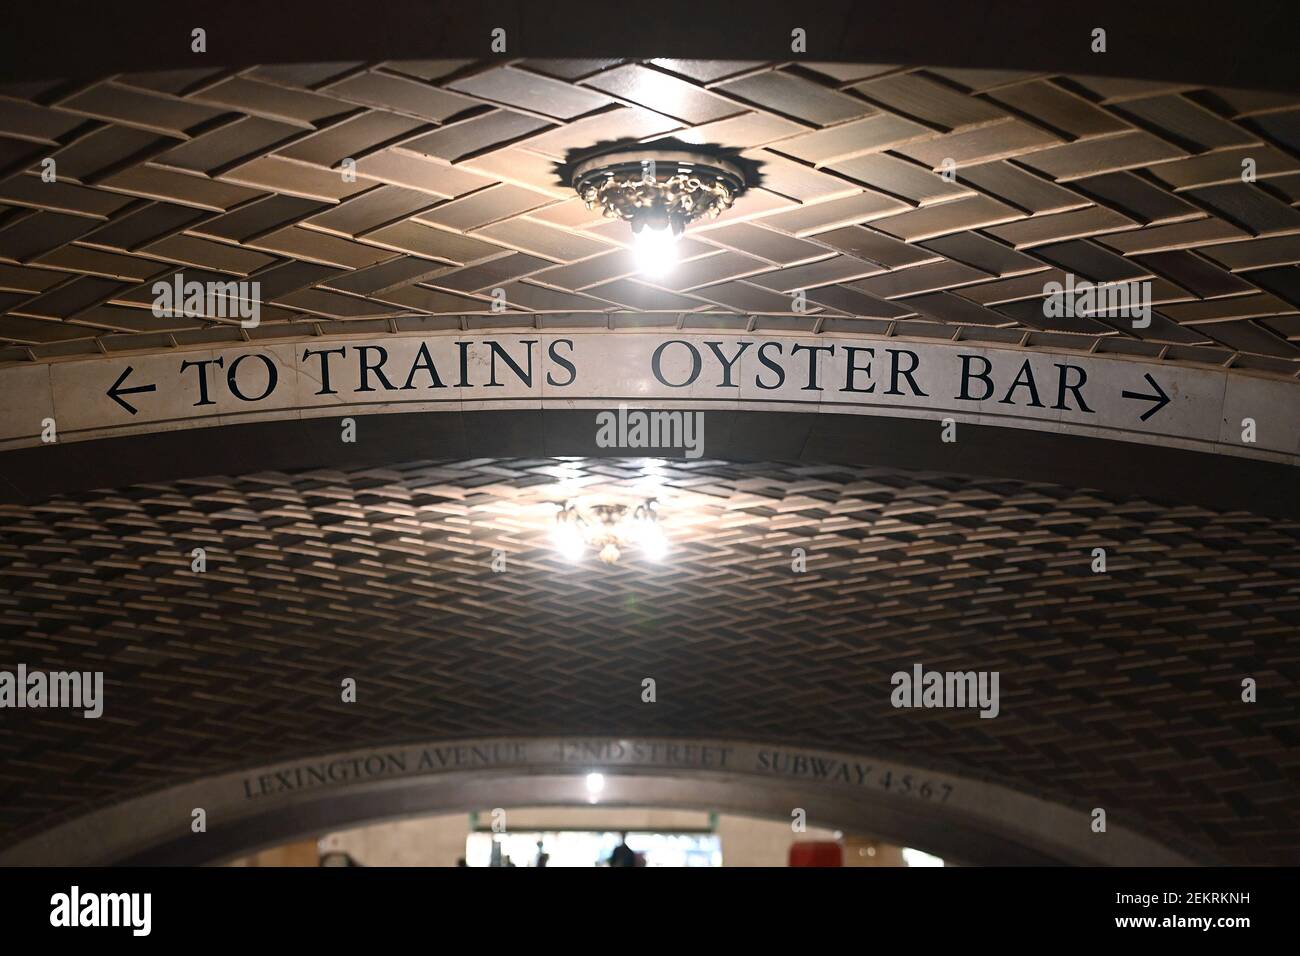 Grand Central Oyster Bar, the underground restaurant in Grand Central Terminal, announced that it is shutting down after only 12 days of permitted indoor dining, New York, NY, October 13, 2020. Citing the economic impact of COVID-19 pandemic, and few customers since reopening, Grand Central Oyster Bar is shutting down until further notice.(Anthony Behar/Sipa USA) Stock Photo